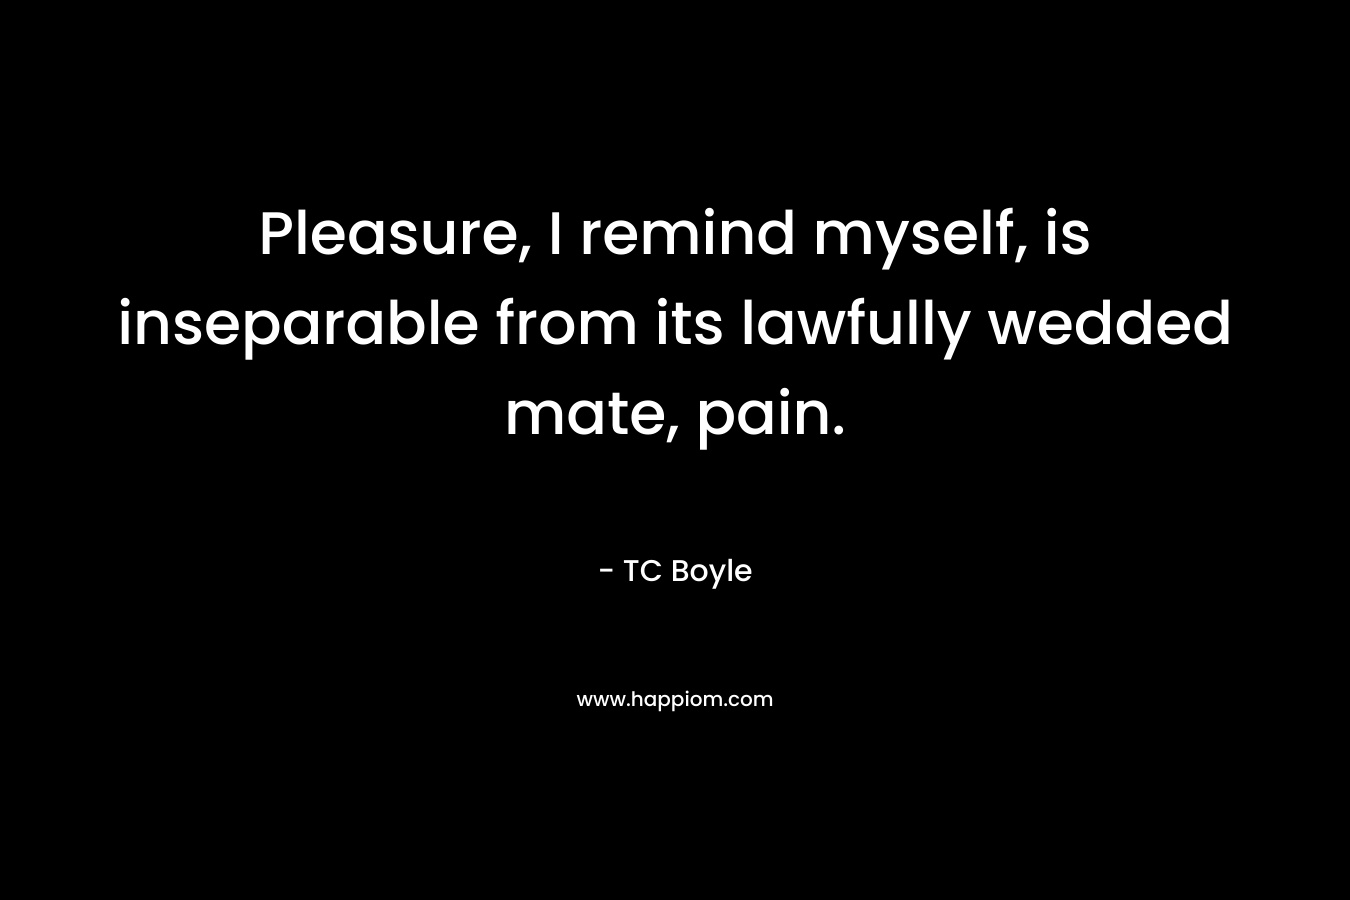 Pleasure, I remind myself, is inseparable from its lawfully wedded mate, pain. – TC Boyle